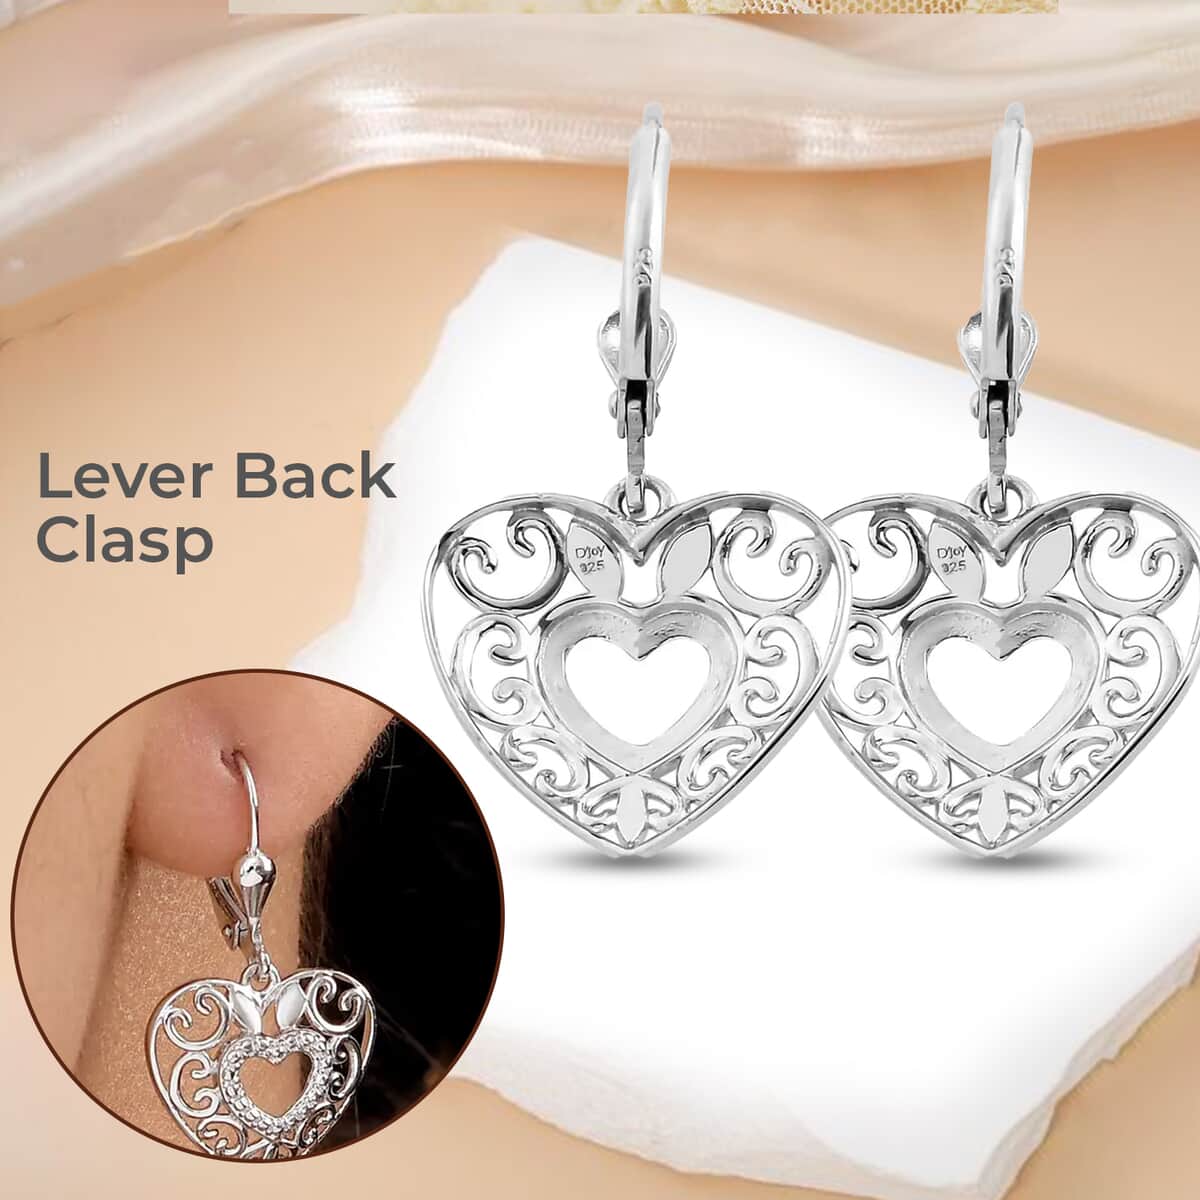 Mother’s Day Gift Openwork Earrings, Filigree Earrings, Lever Back Earrings, Drop Earrings, Platinum Plated Sterling Silver Earrings, Heart Earrings For Women, Jewelry Gifts For Birthday image number 3